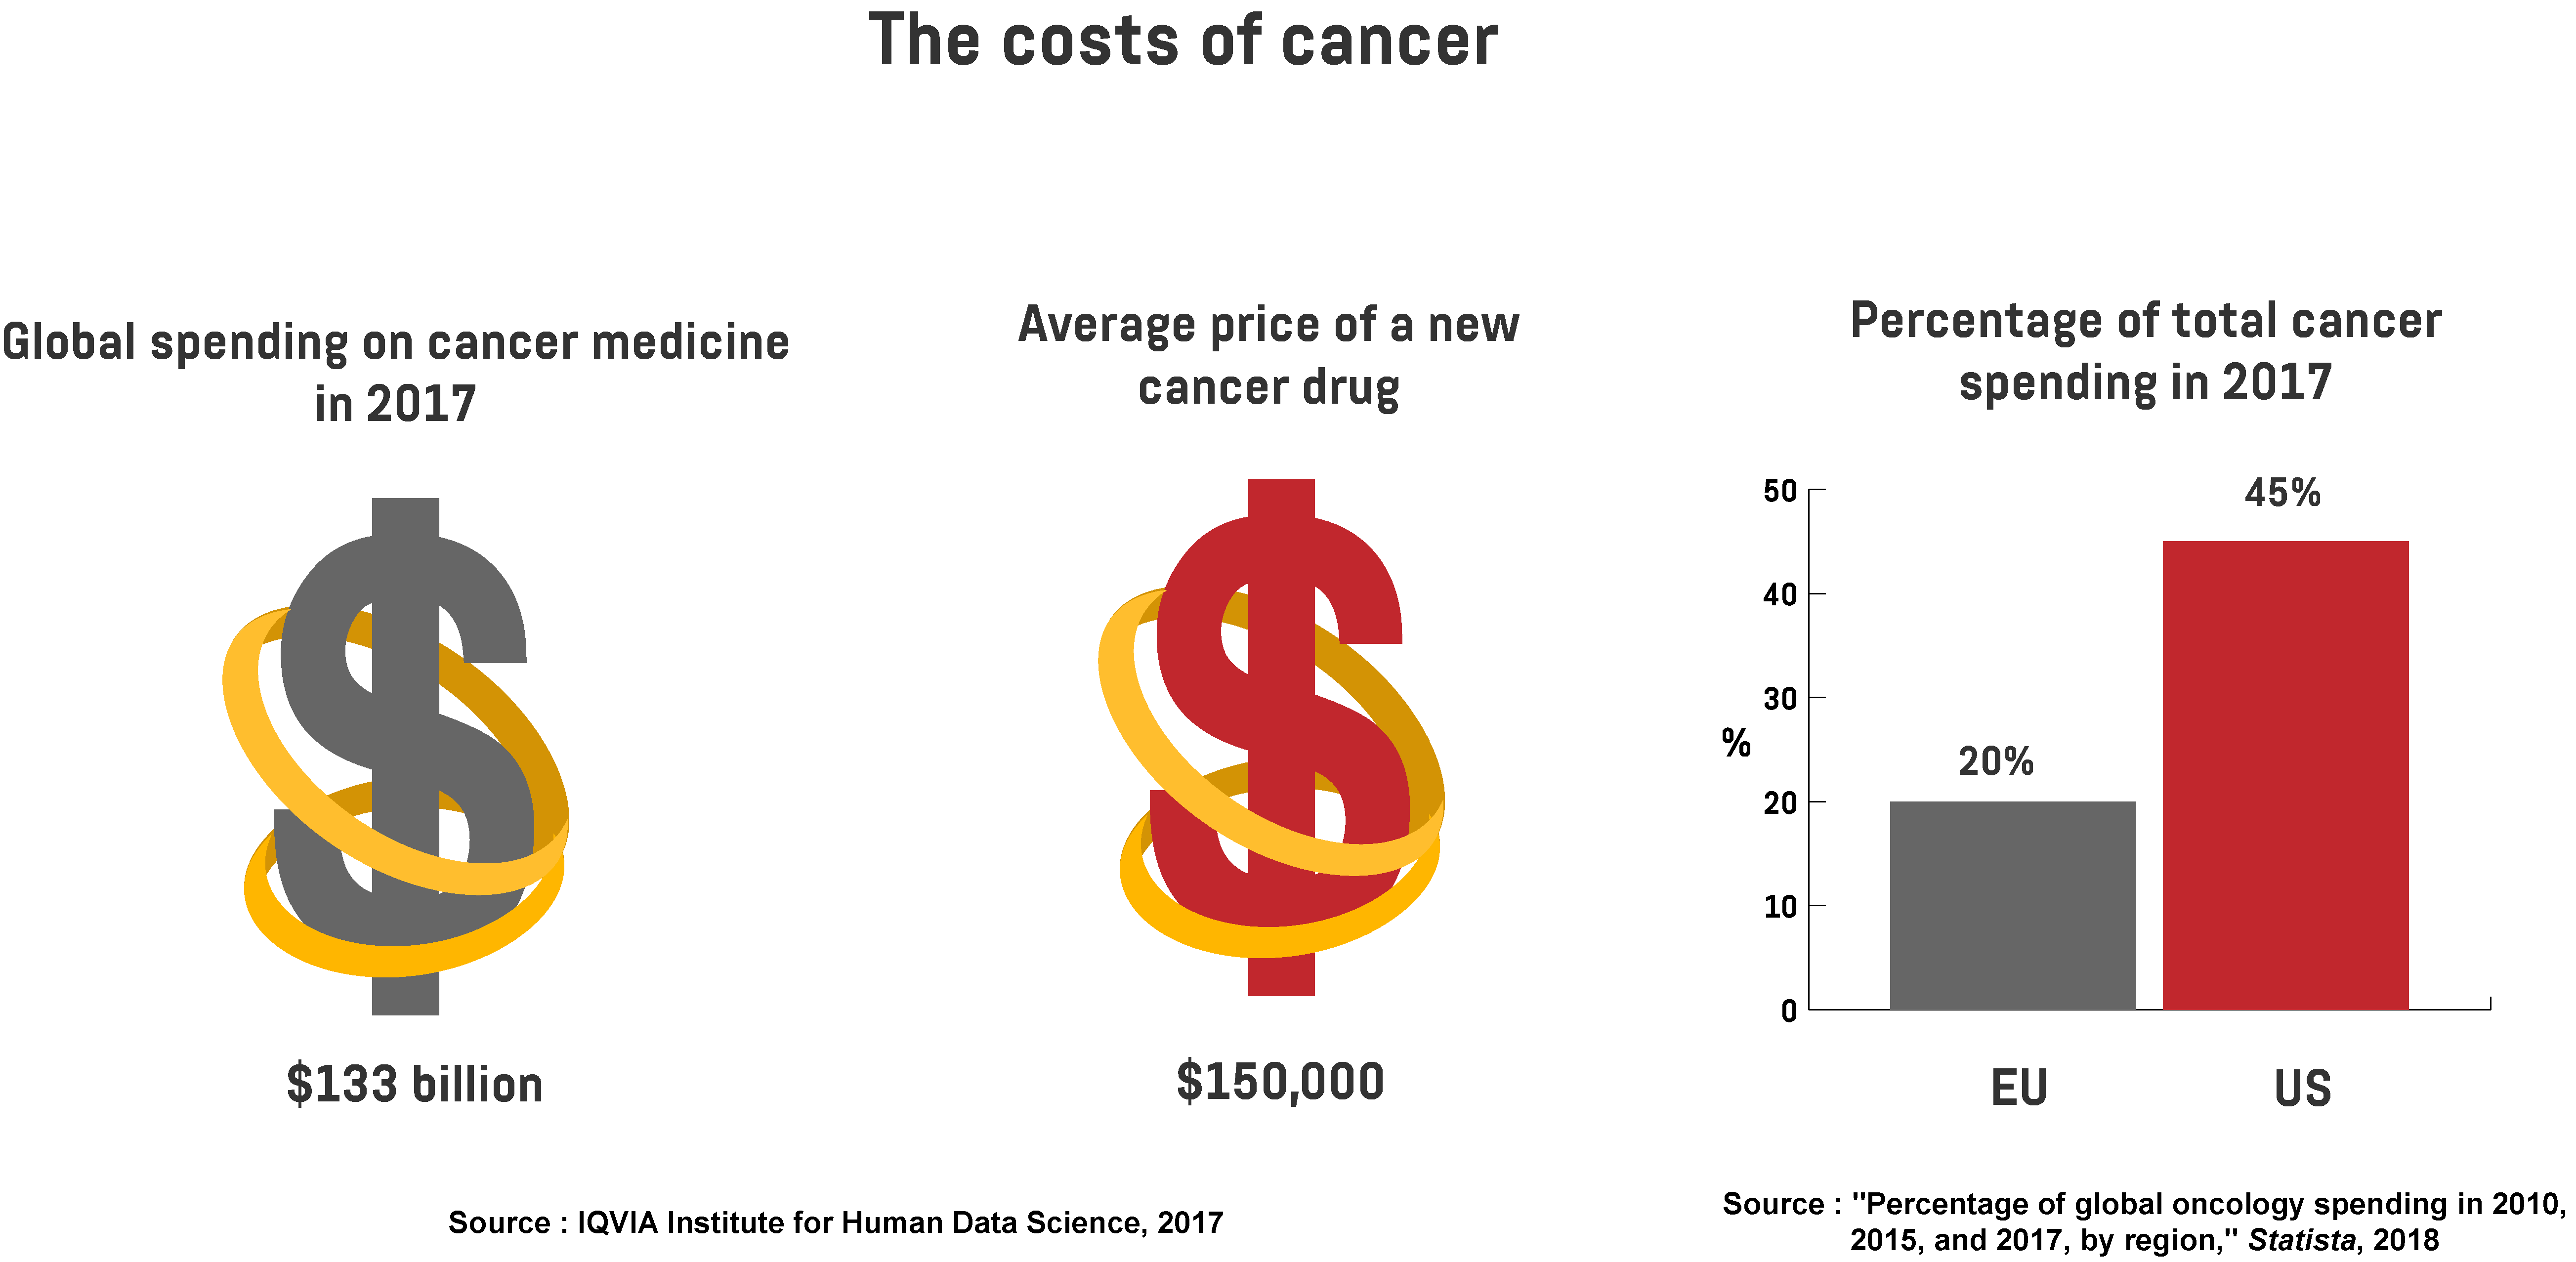 Infographic showing the costs of cancer in 2017, presented by total spending, cost of new cancer drugs, and how much of the spending is attributed to the US and the EU.